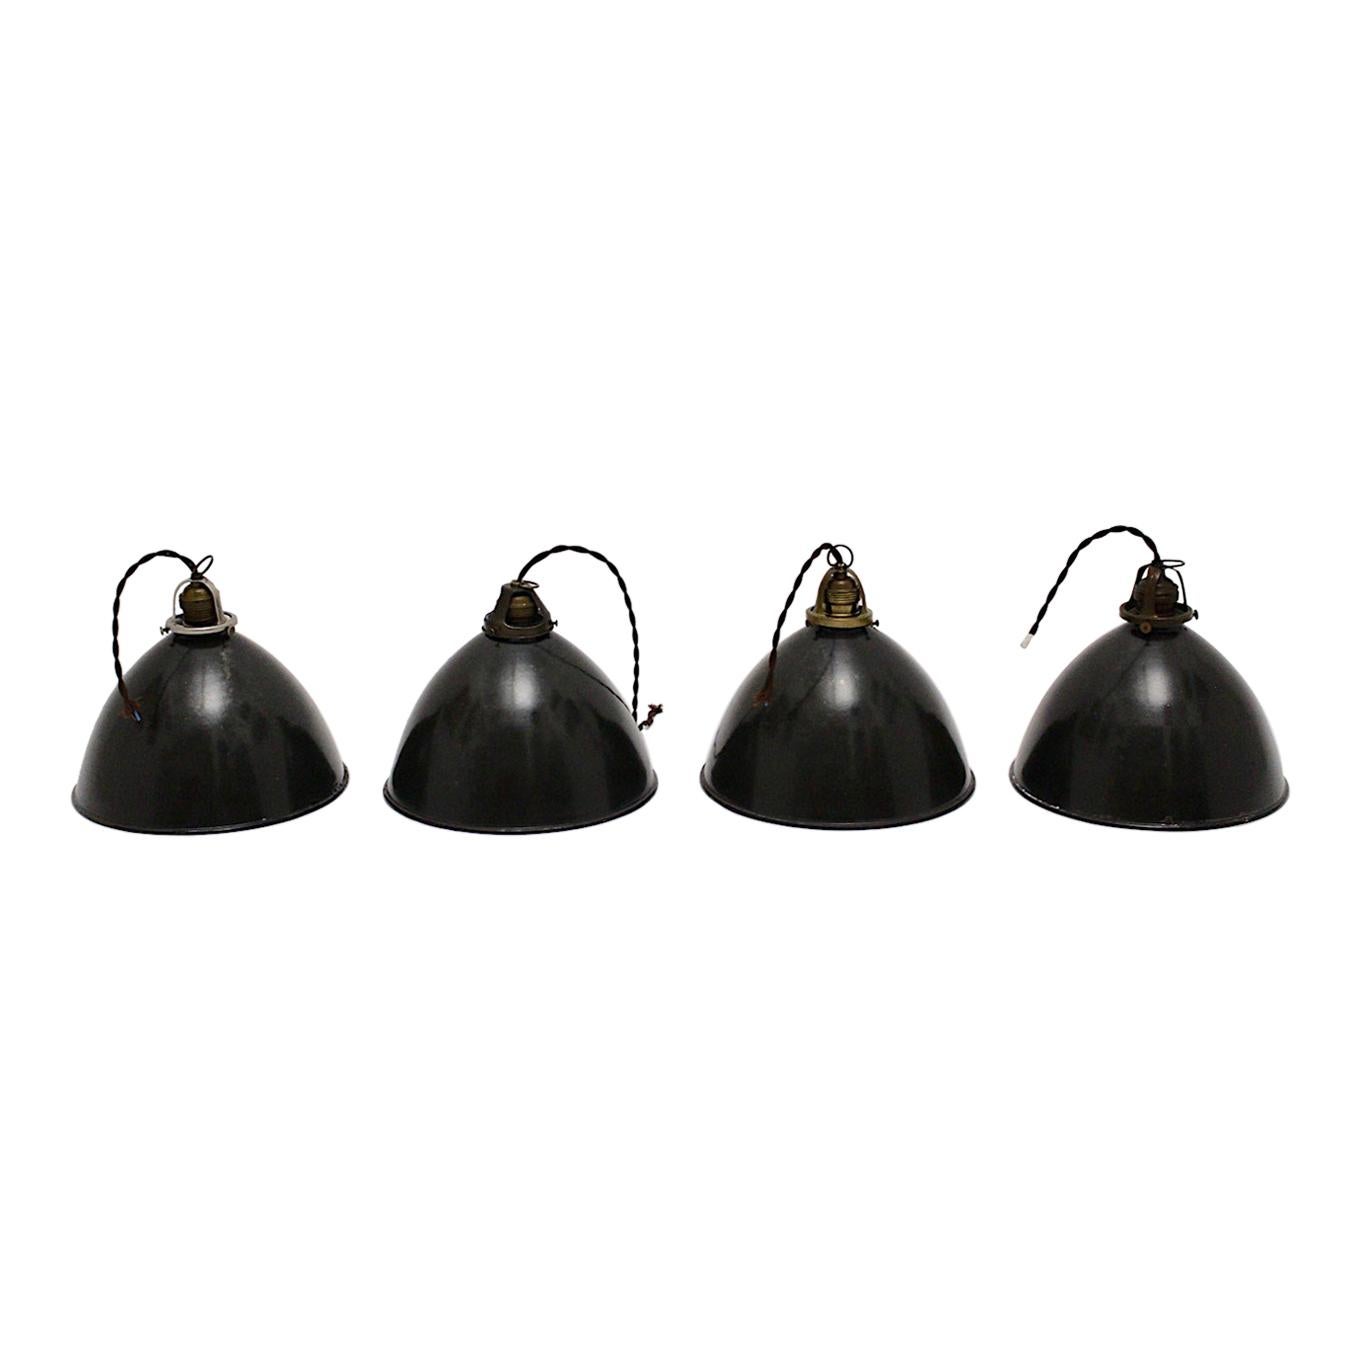 Bauhaus Black and White Vintage Set of four Email Hanging Lamps, 1920s, Germany